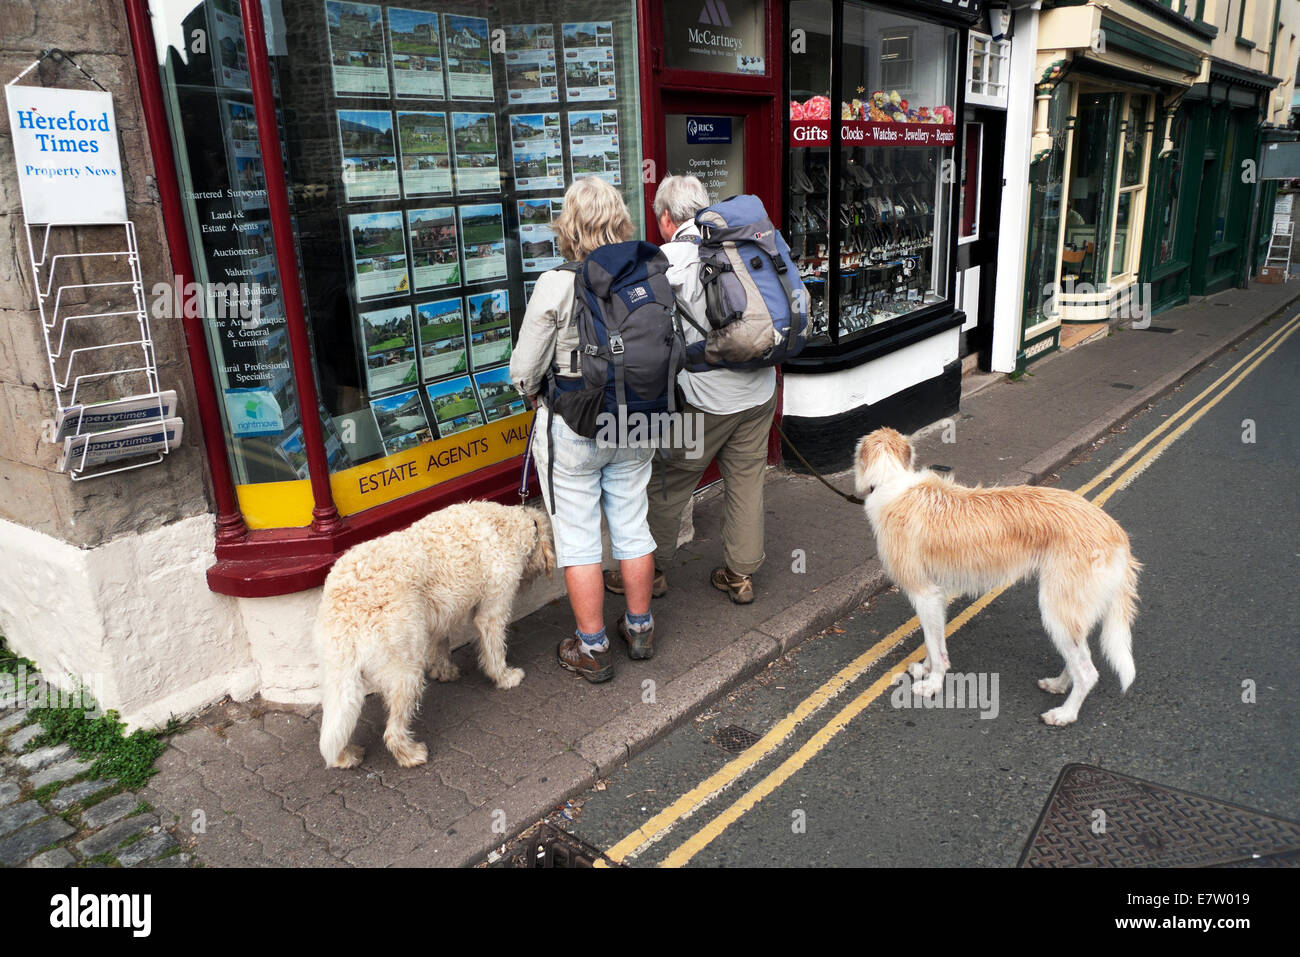 Rear view of two older women with rucksacks and dogs looking in an estate agent window in Hay-on-Wye Wales UK  KATHY DEWITT Stock Photo